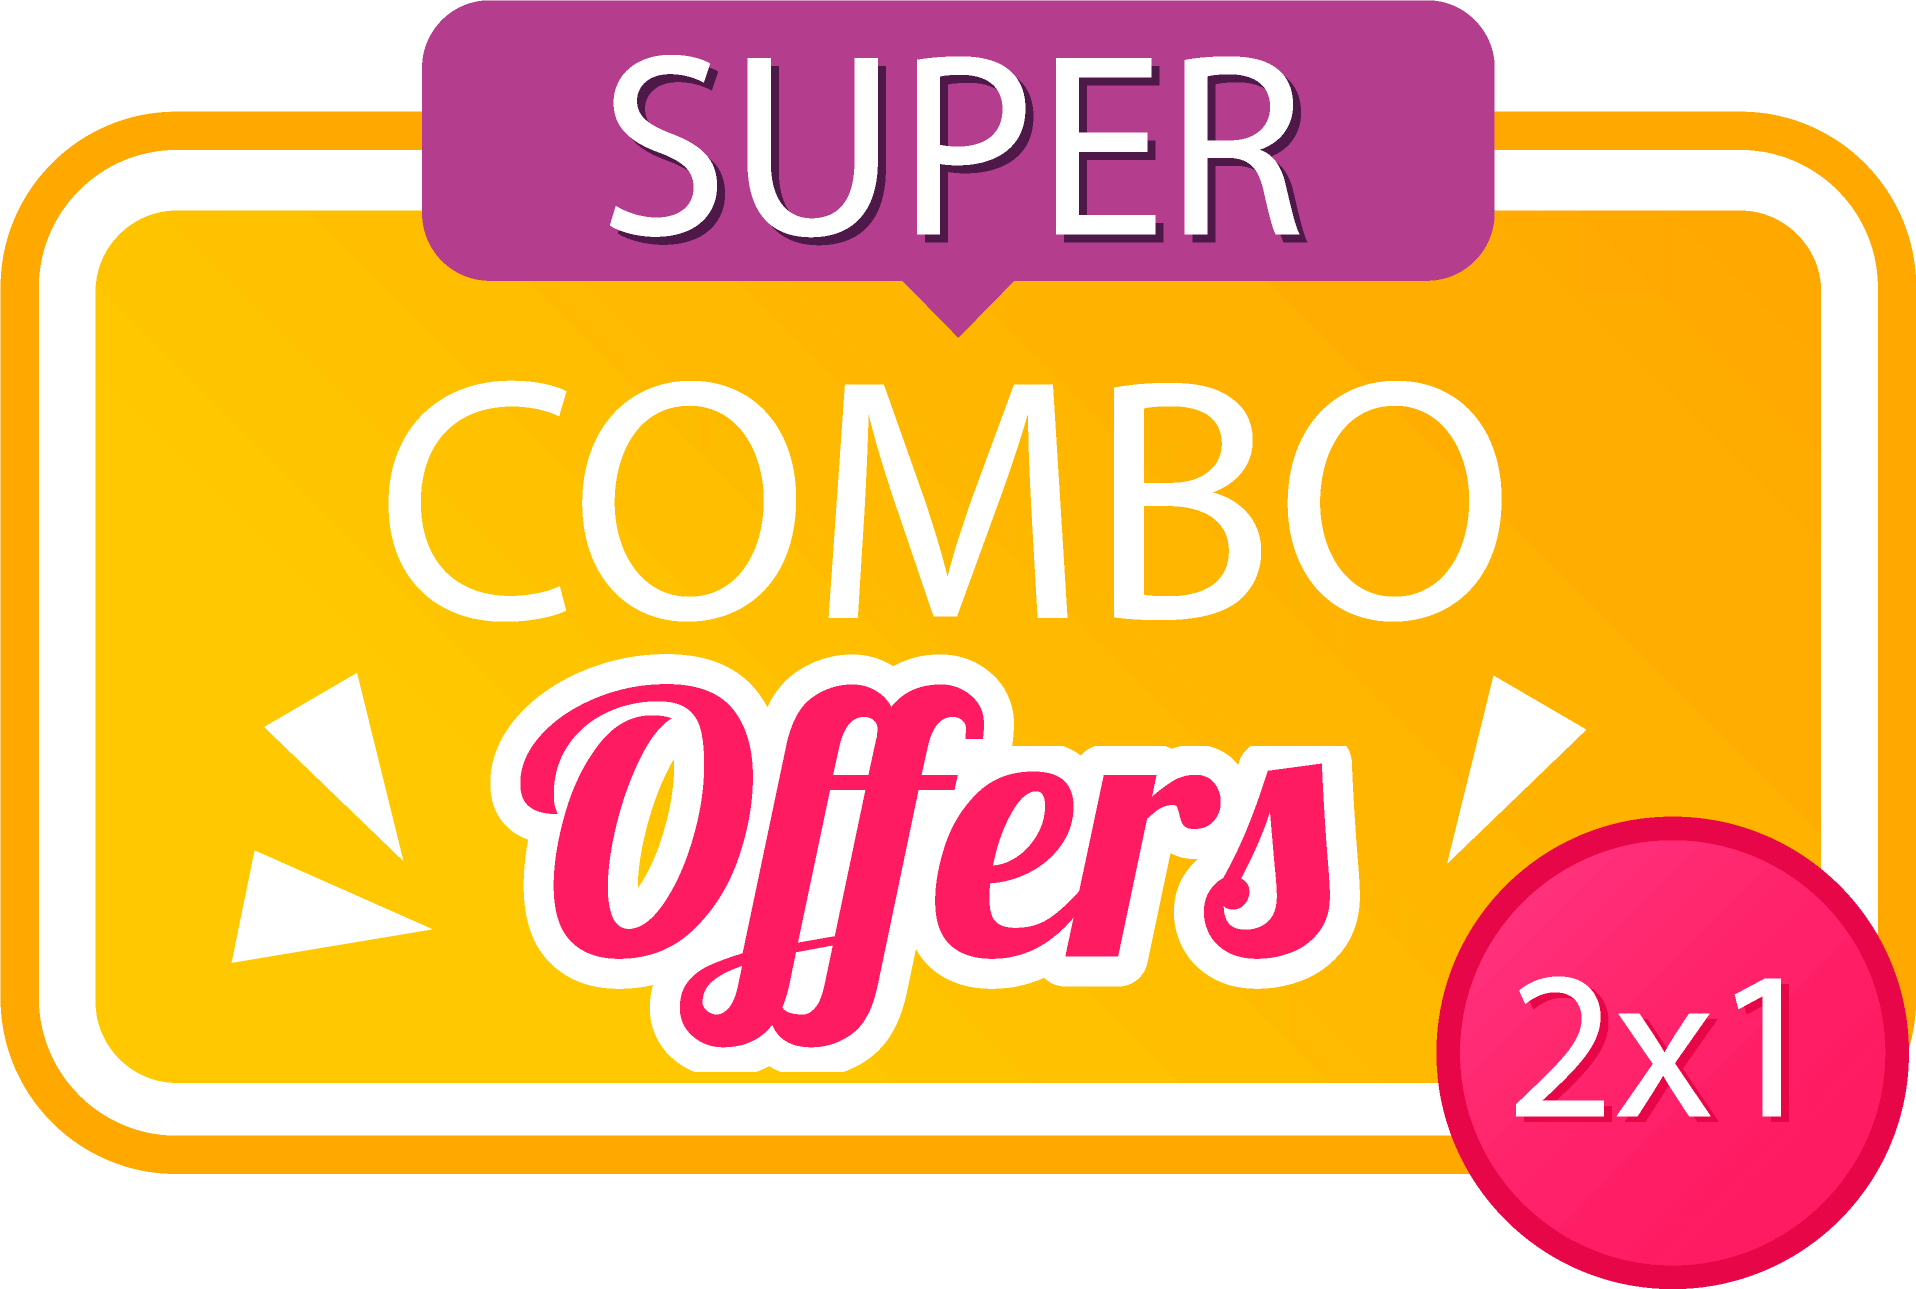 Super Combo Offers Vector PNG Offer Sale 30-50% off Image Download